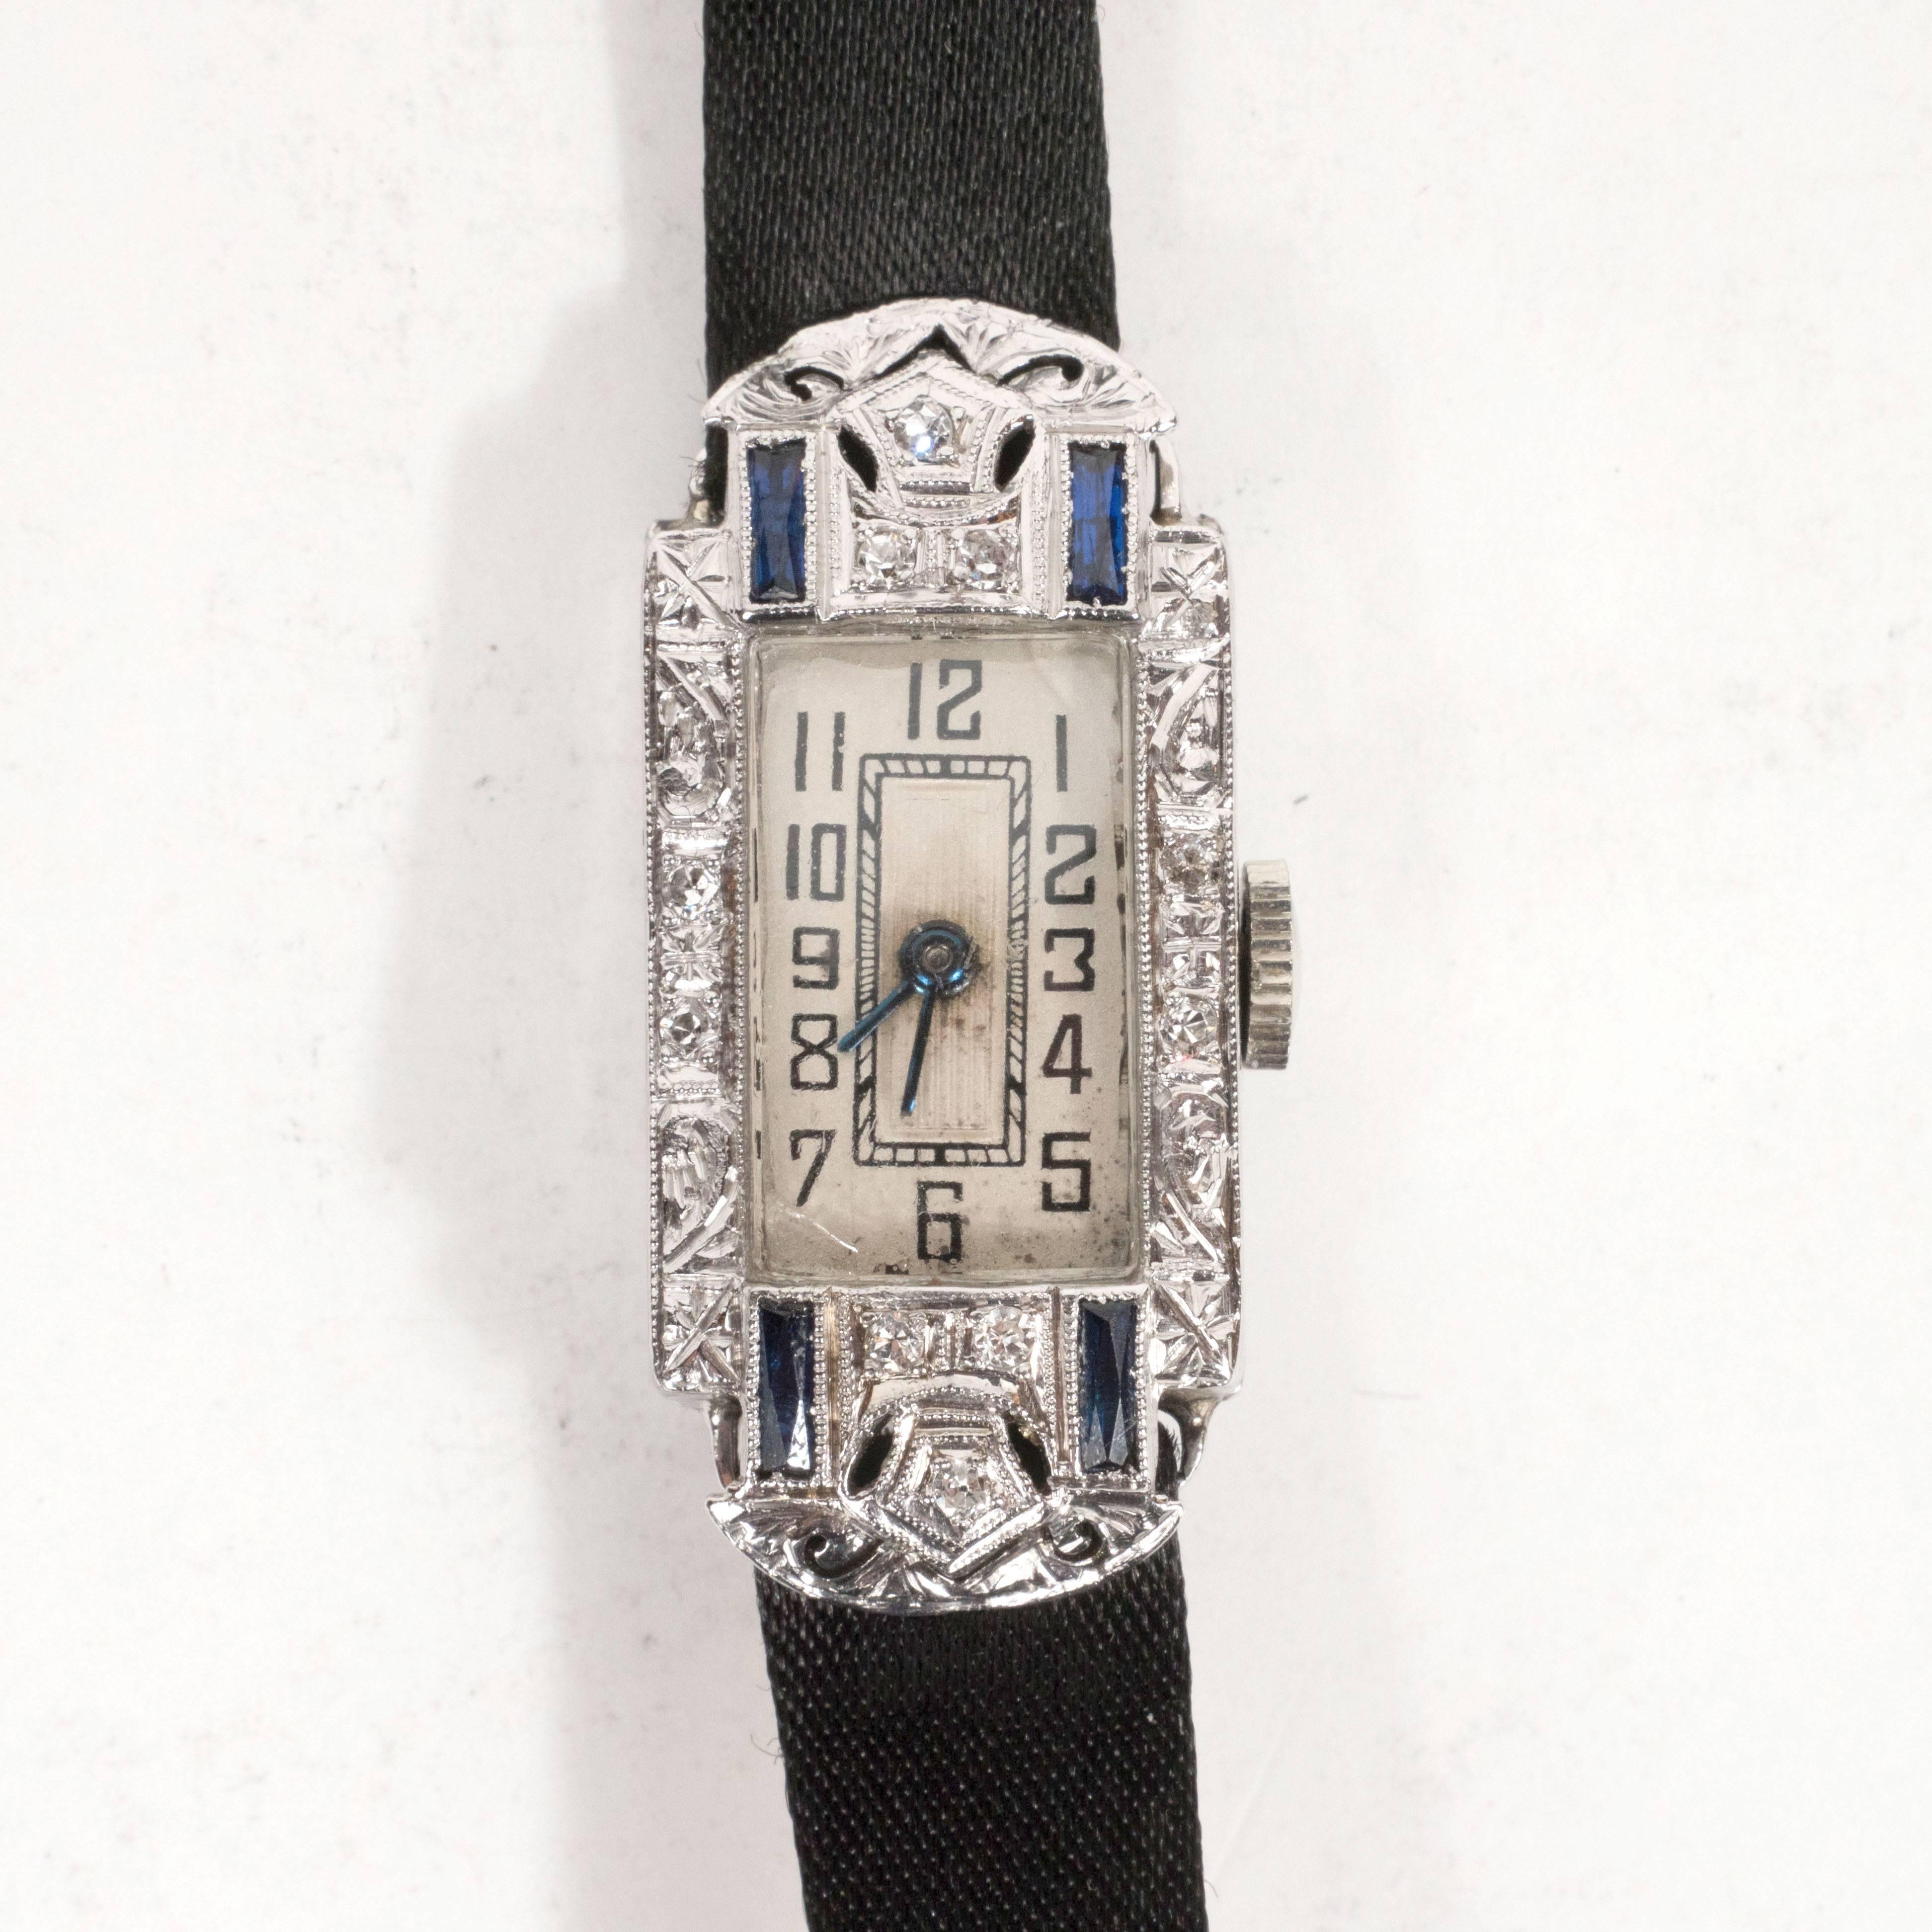 Exquisite White Gold Sapphire Art Deco Wristwatch with Satin Band 4